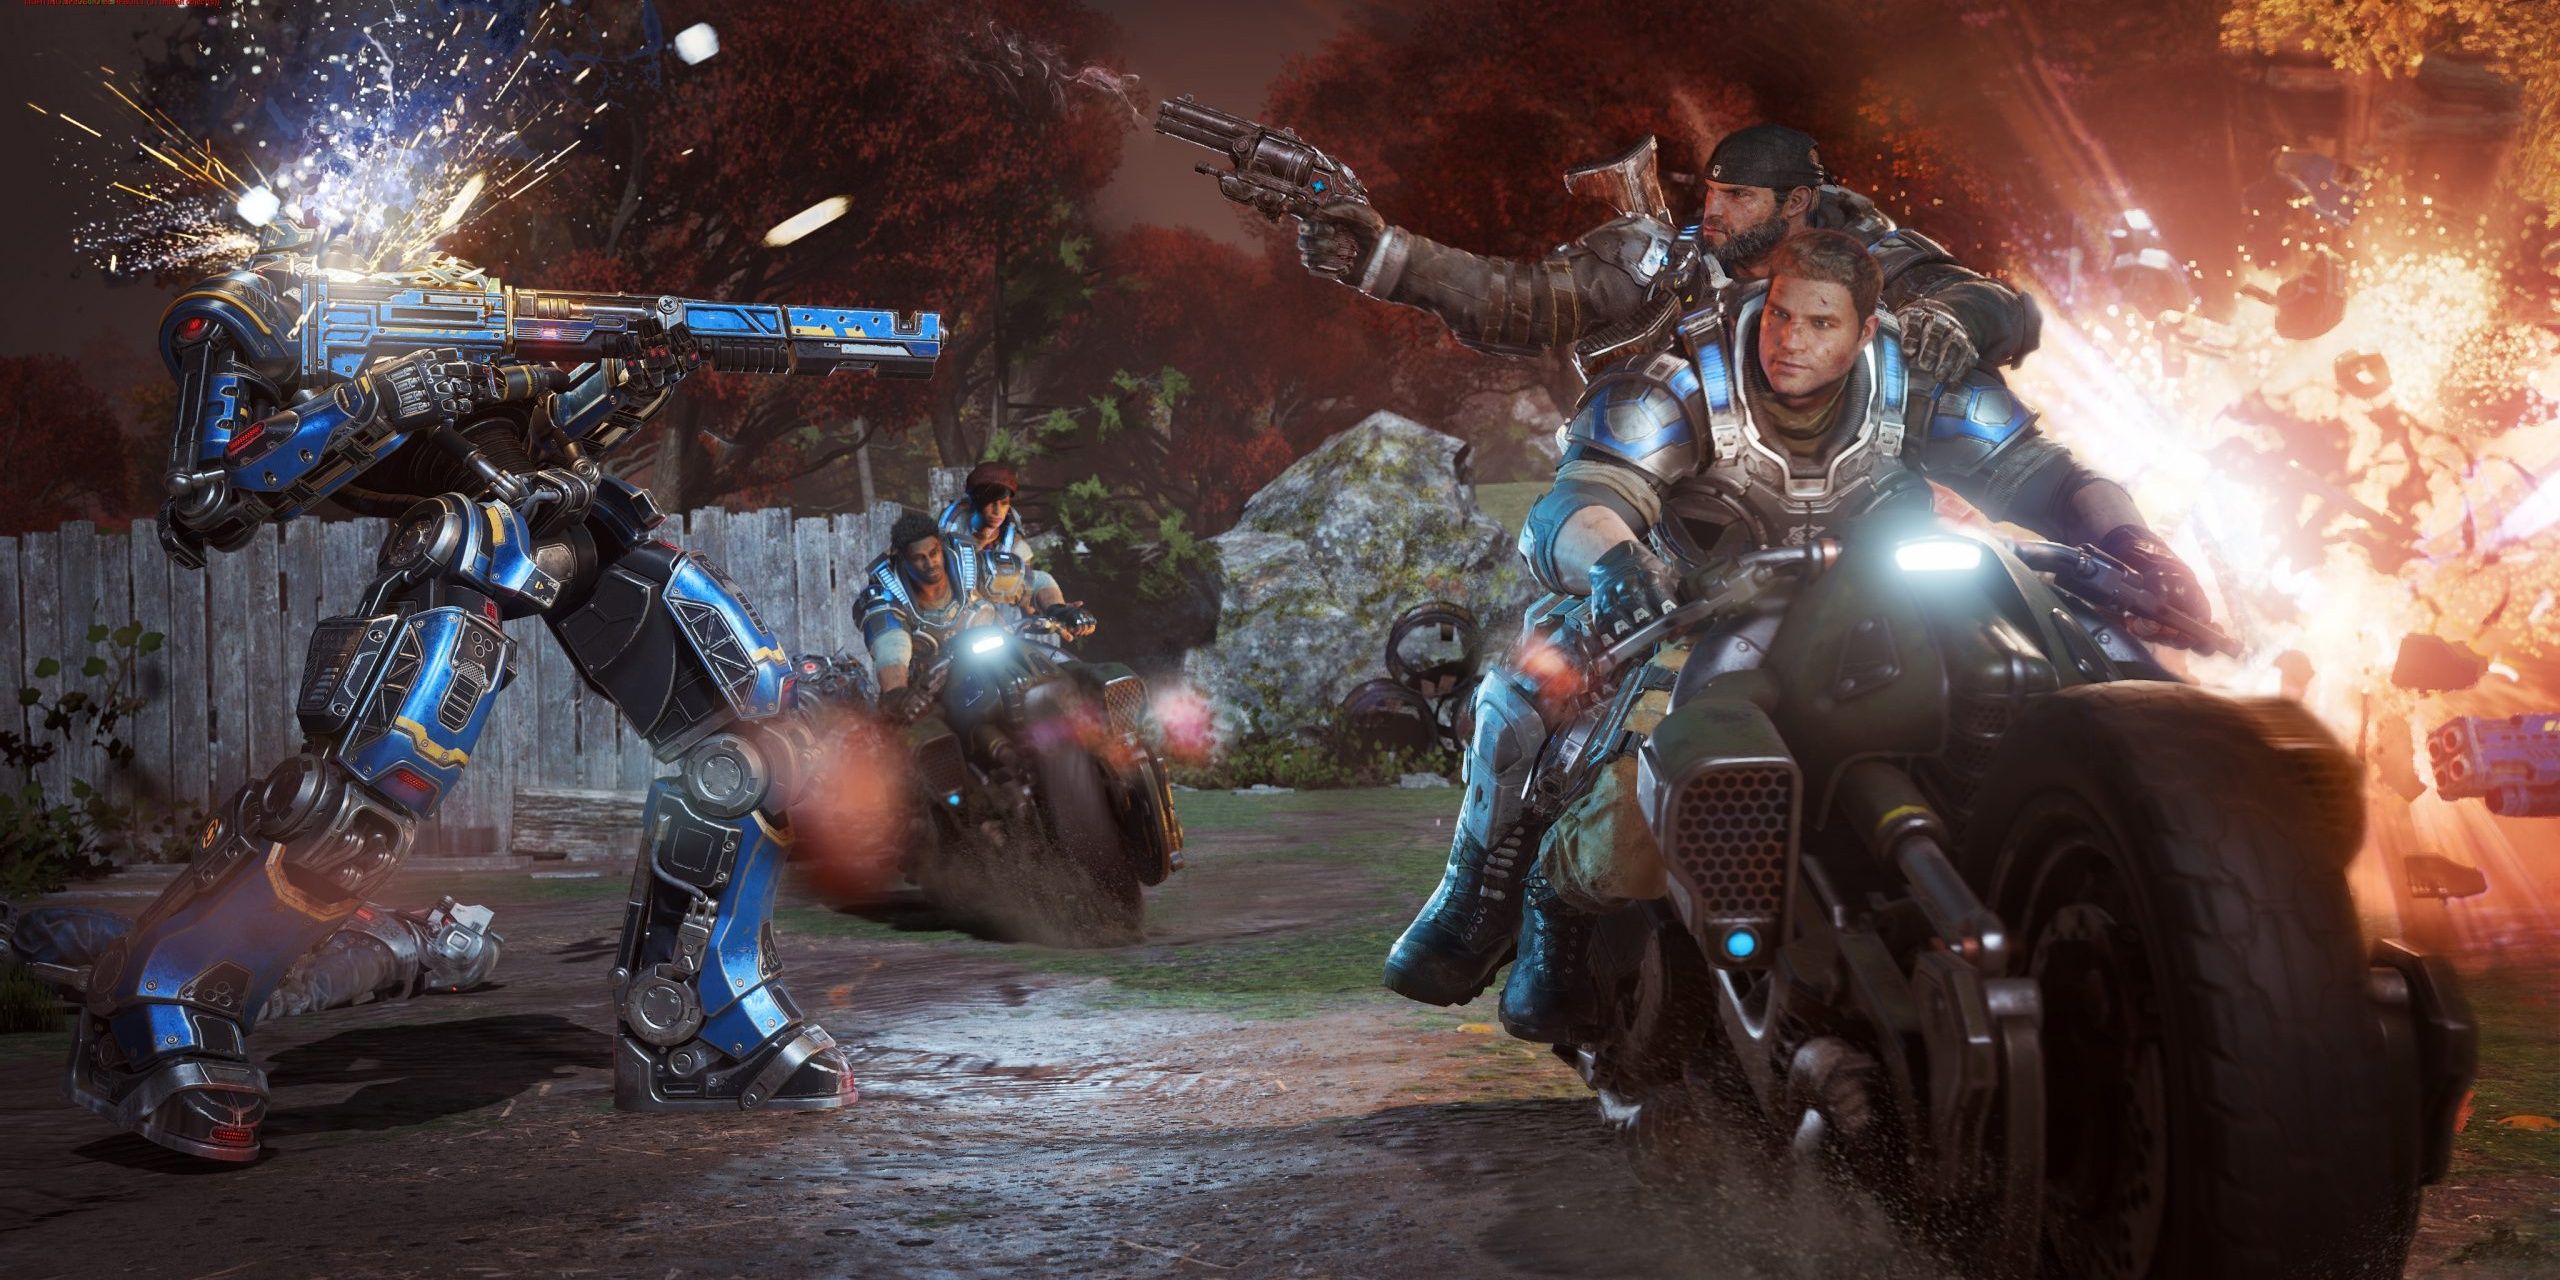 Promotional image of Gears of War 4